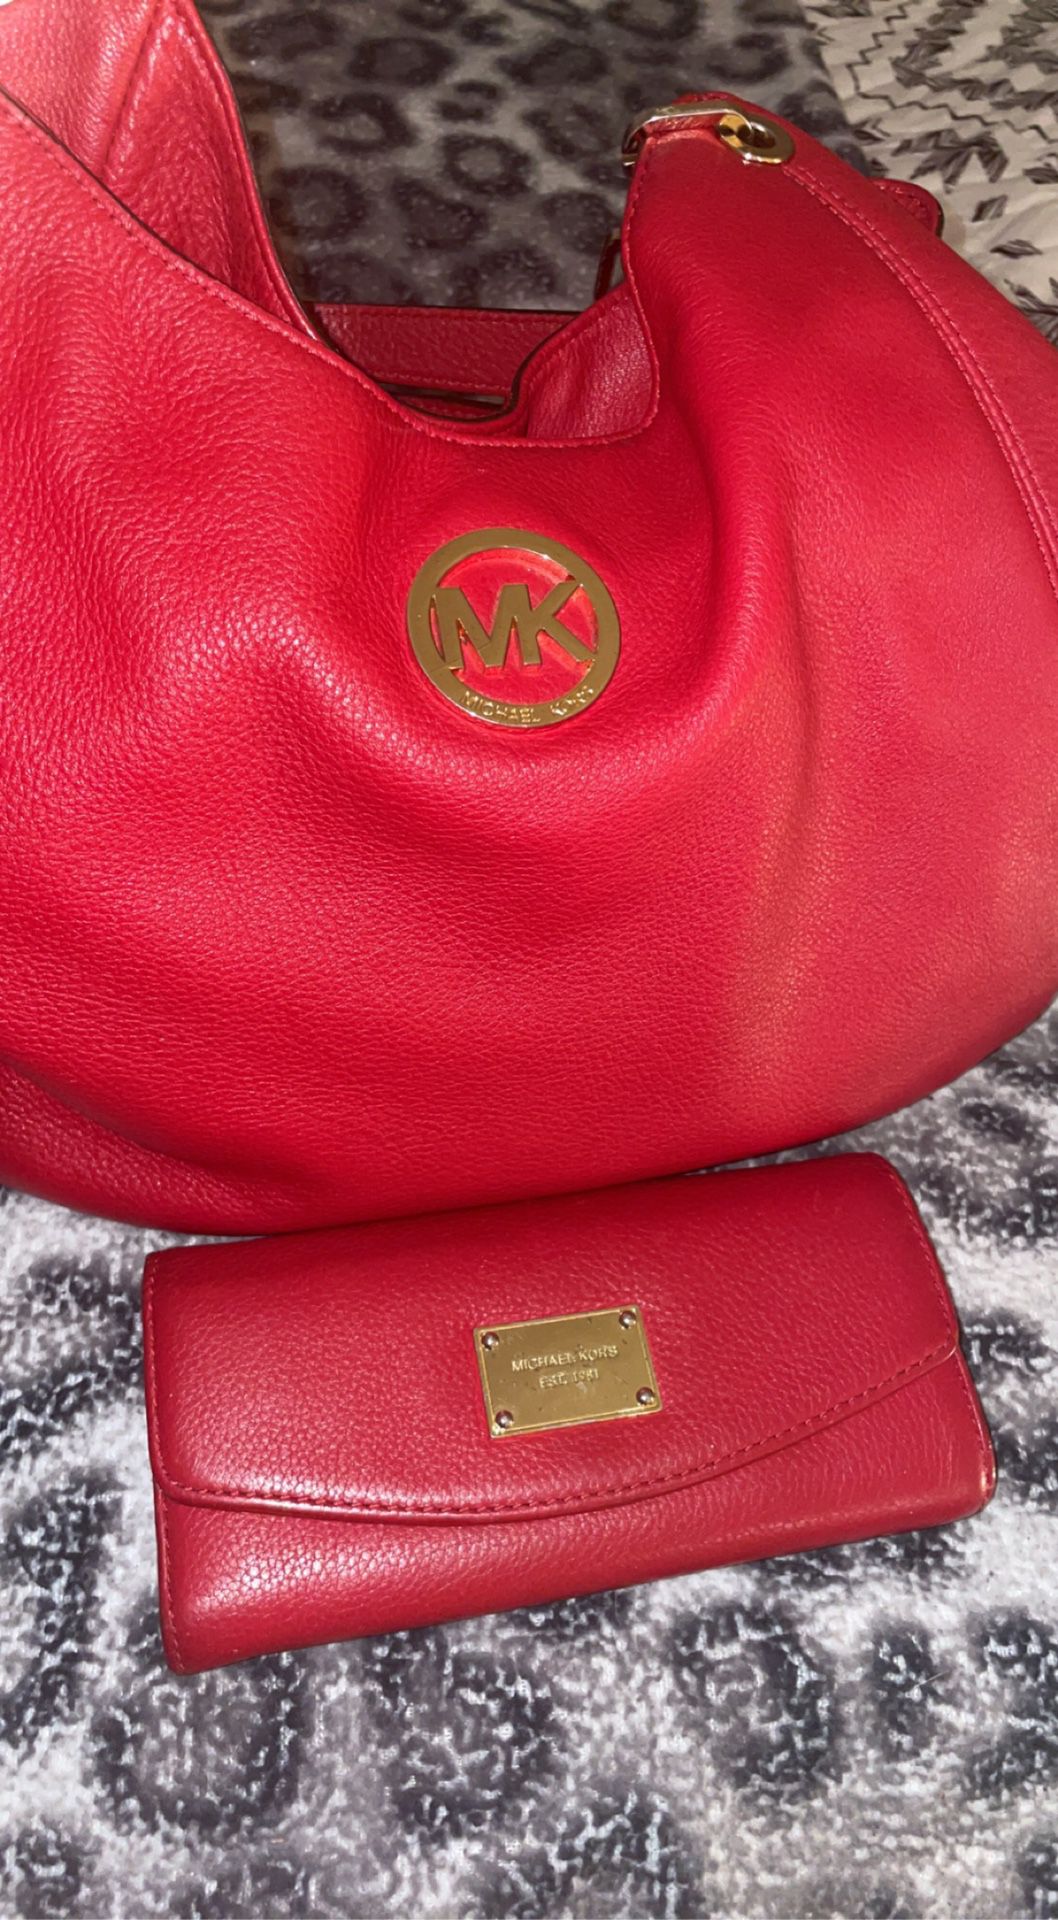 MK Bag with Matching Wallet 